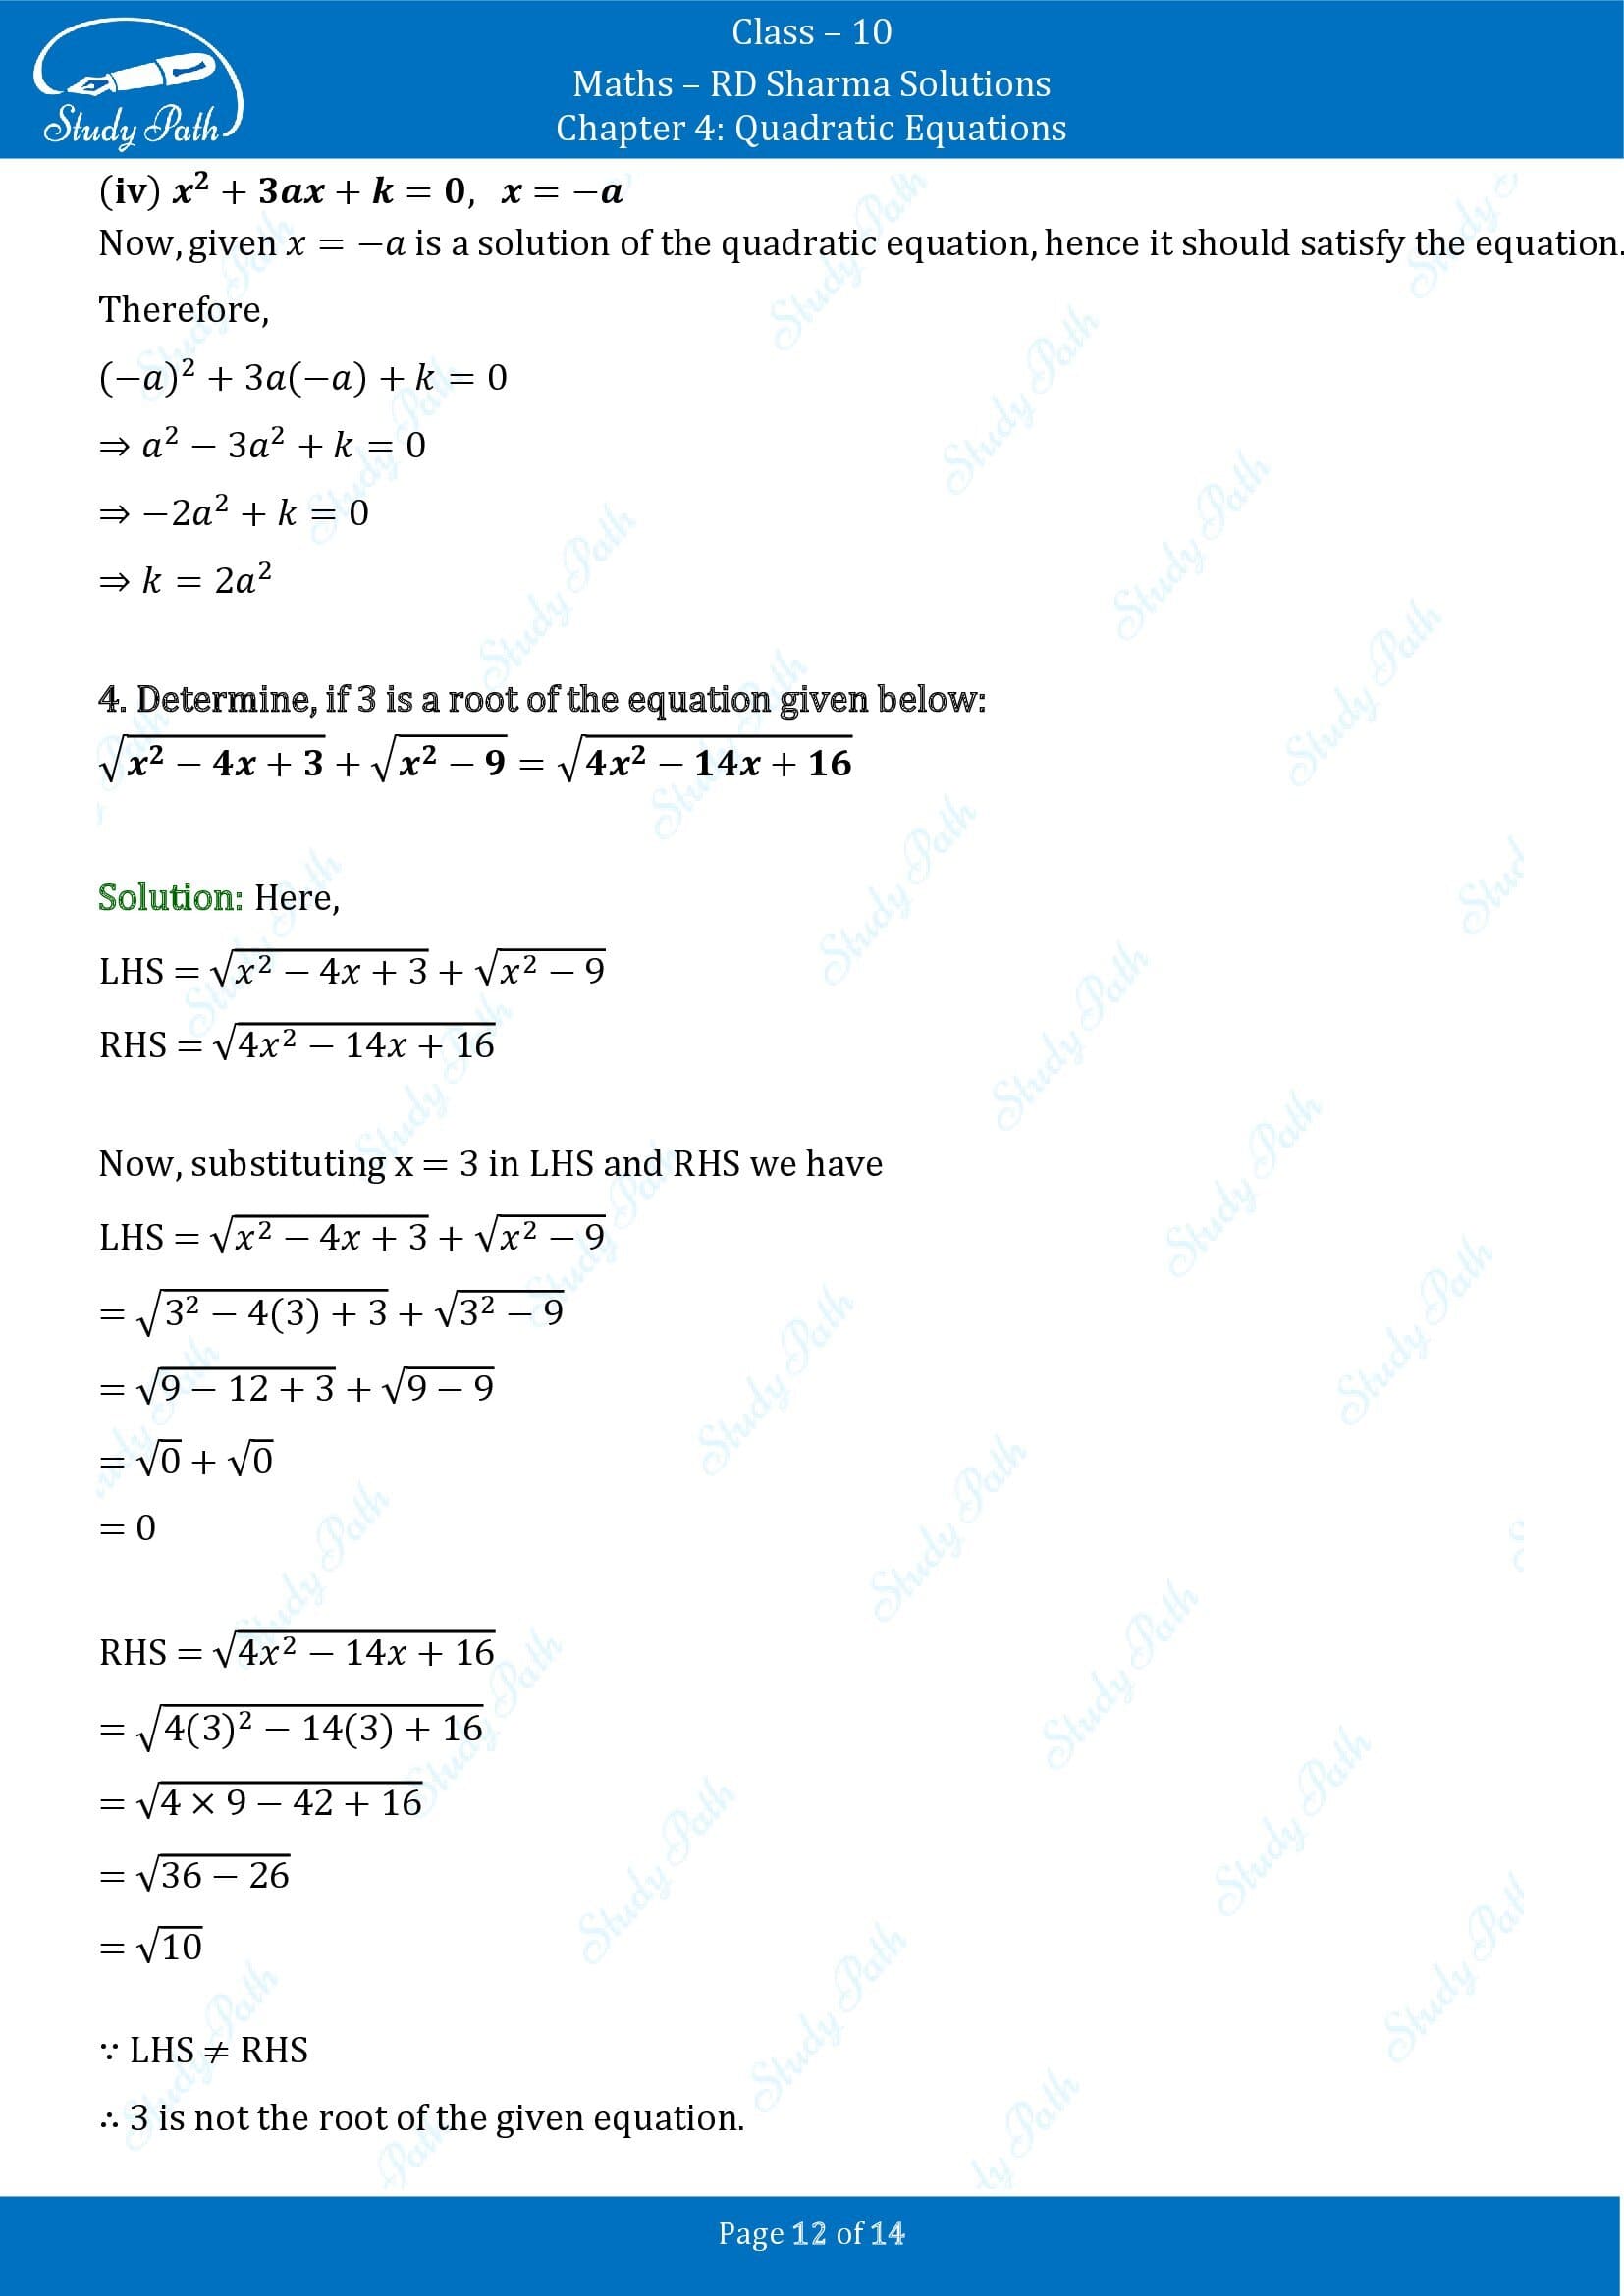 RD Sharma Solutions Class 10 Chapter 4 Quadratic Equations Exercise 4.1 00012